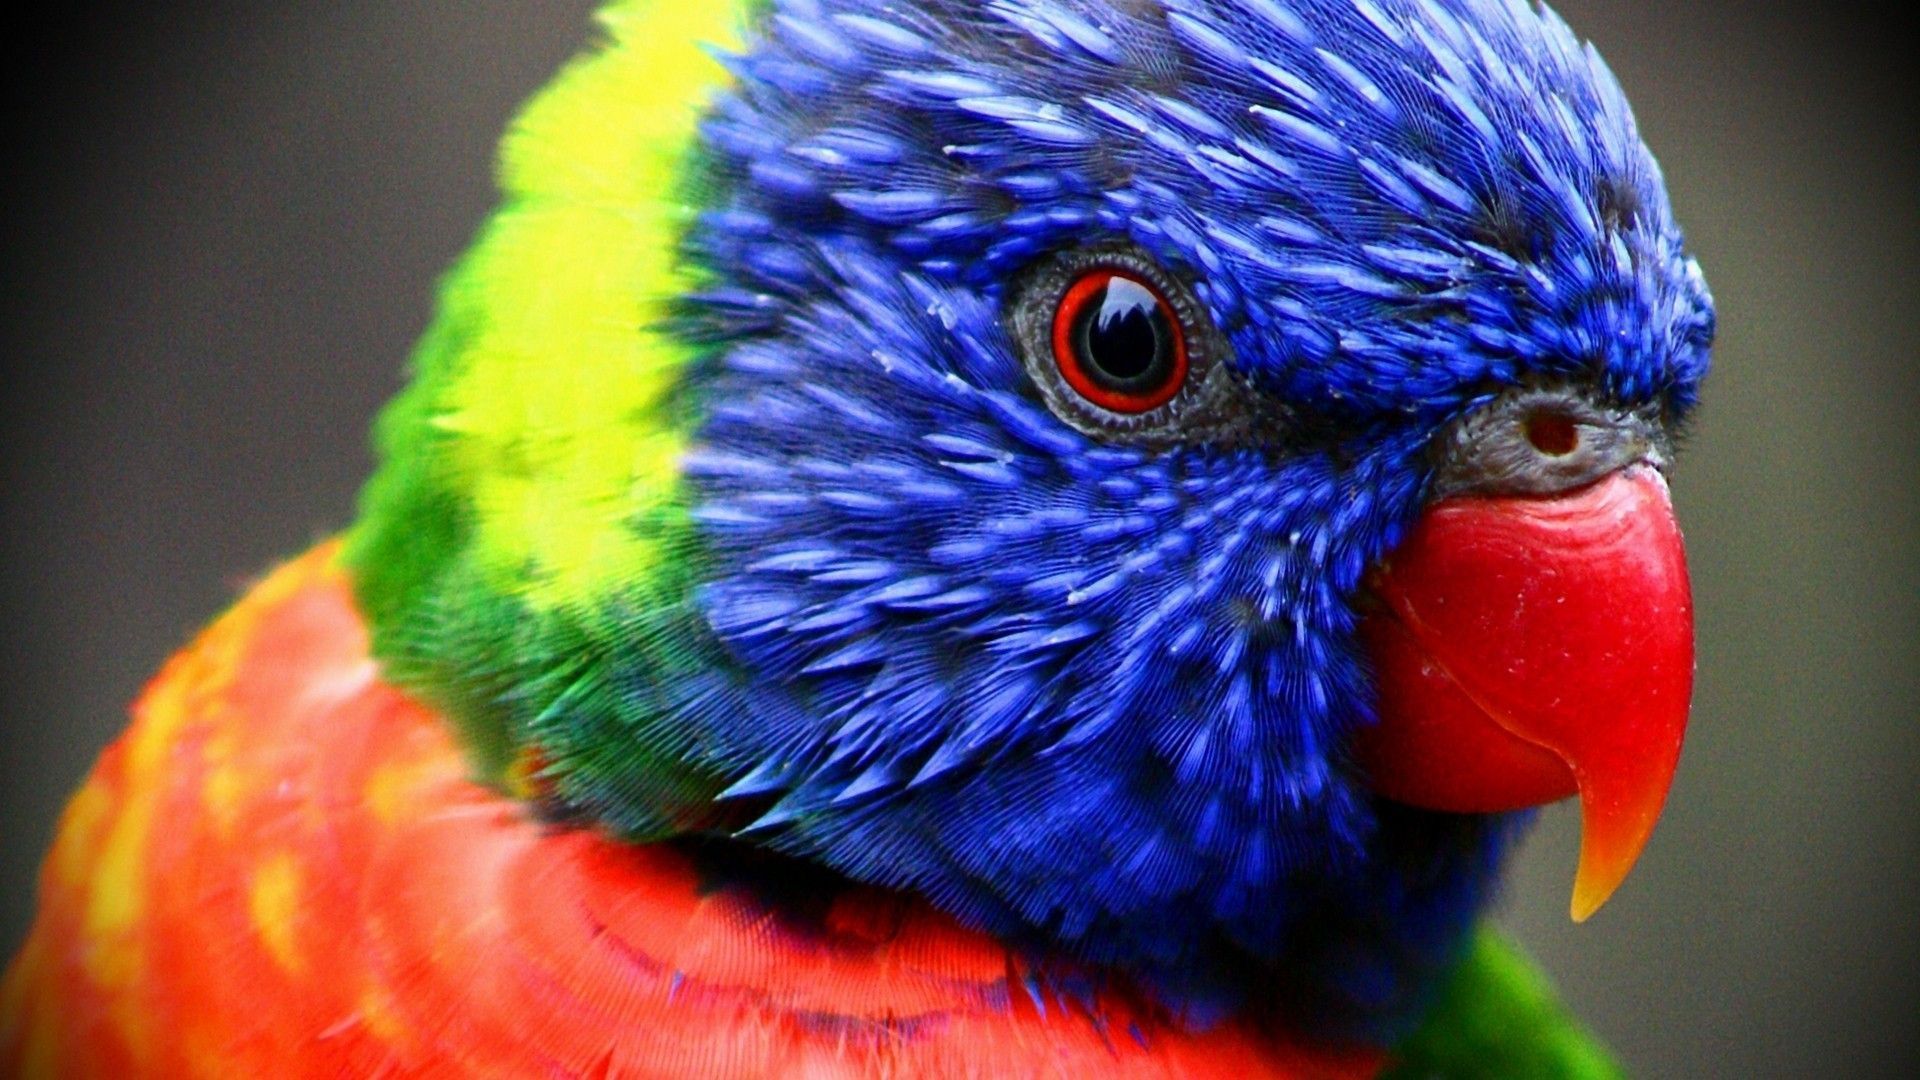 Parrot 1920x1080 wallpapers hd